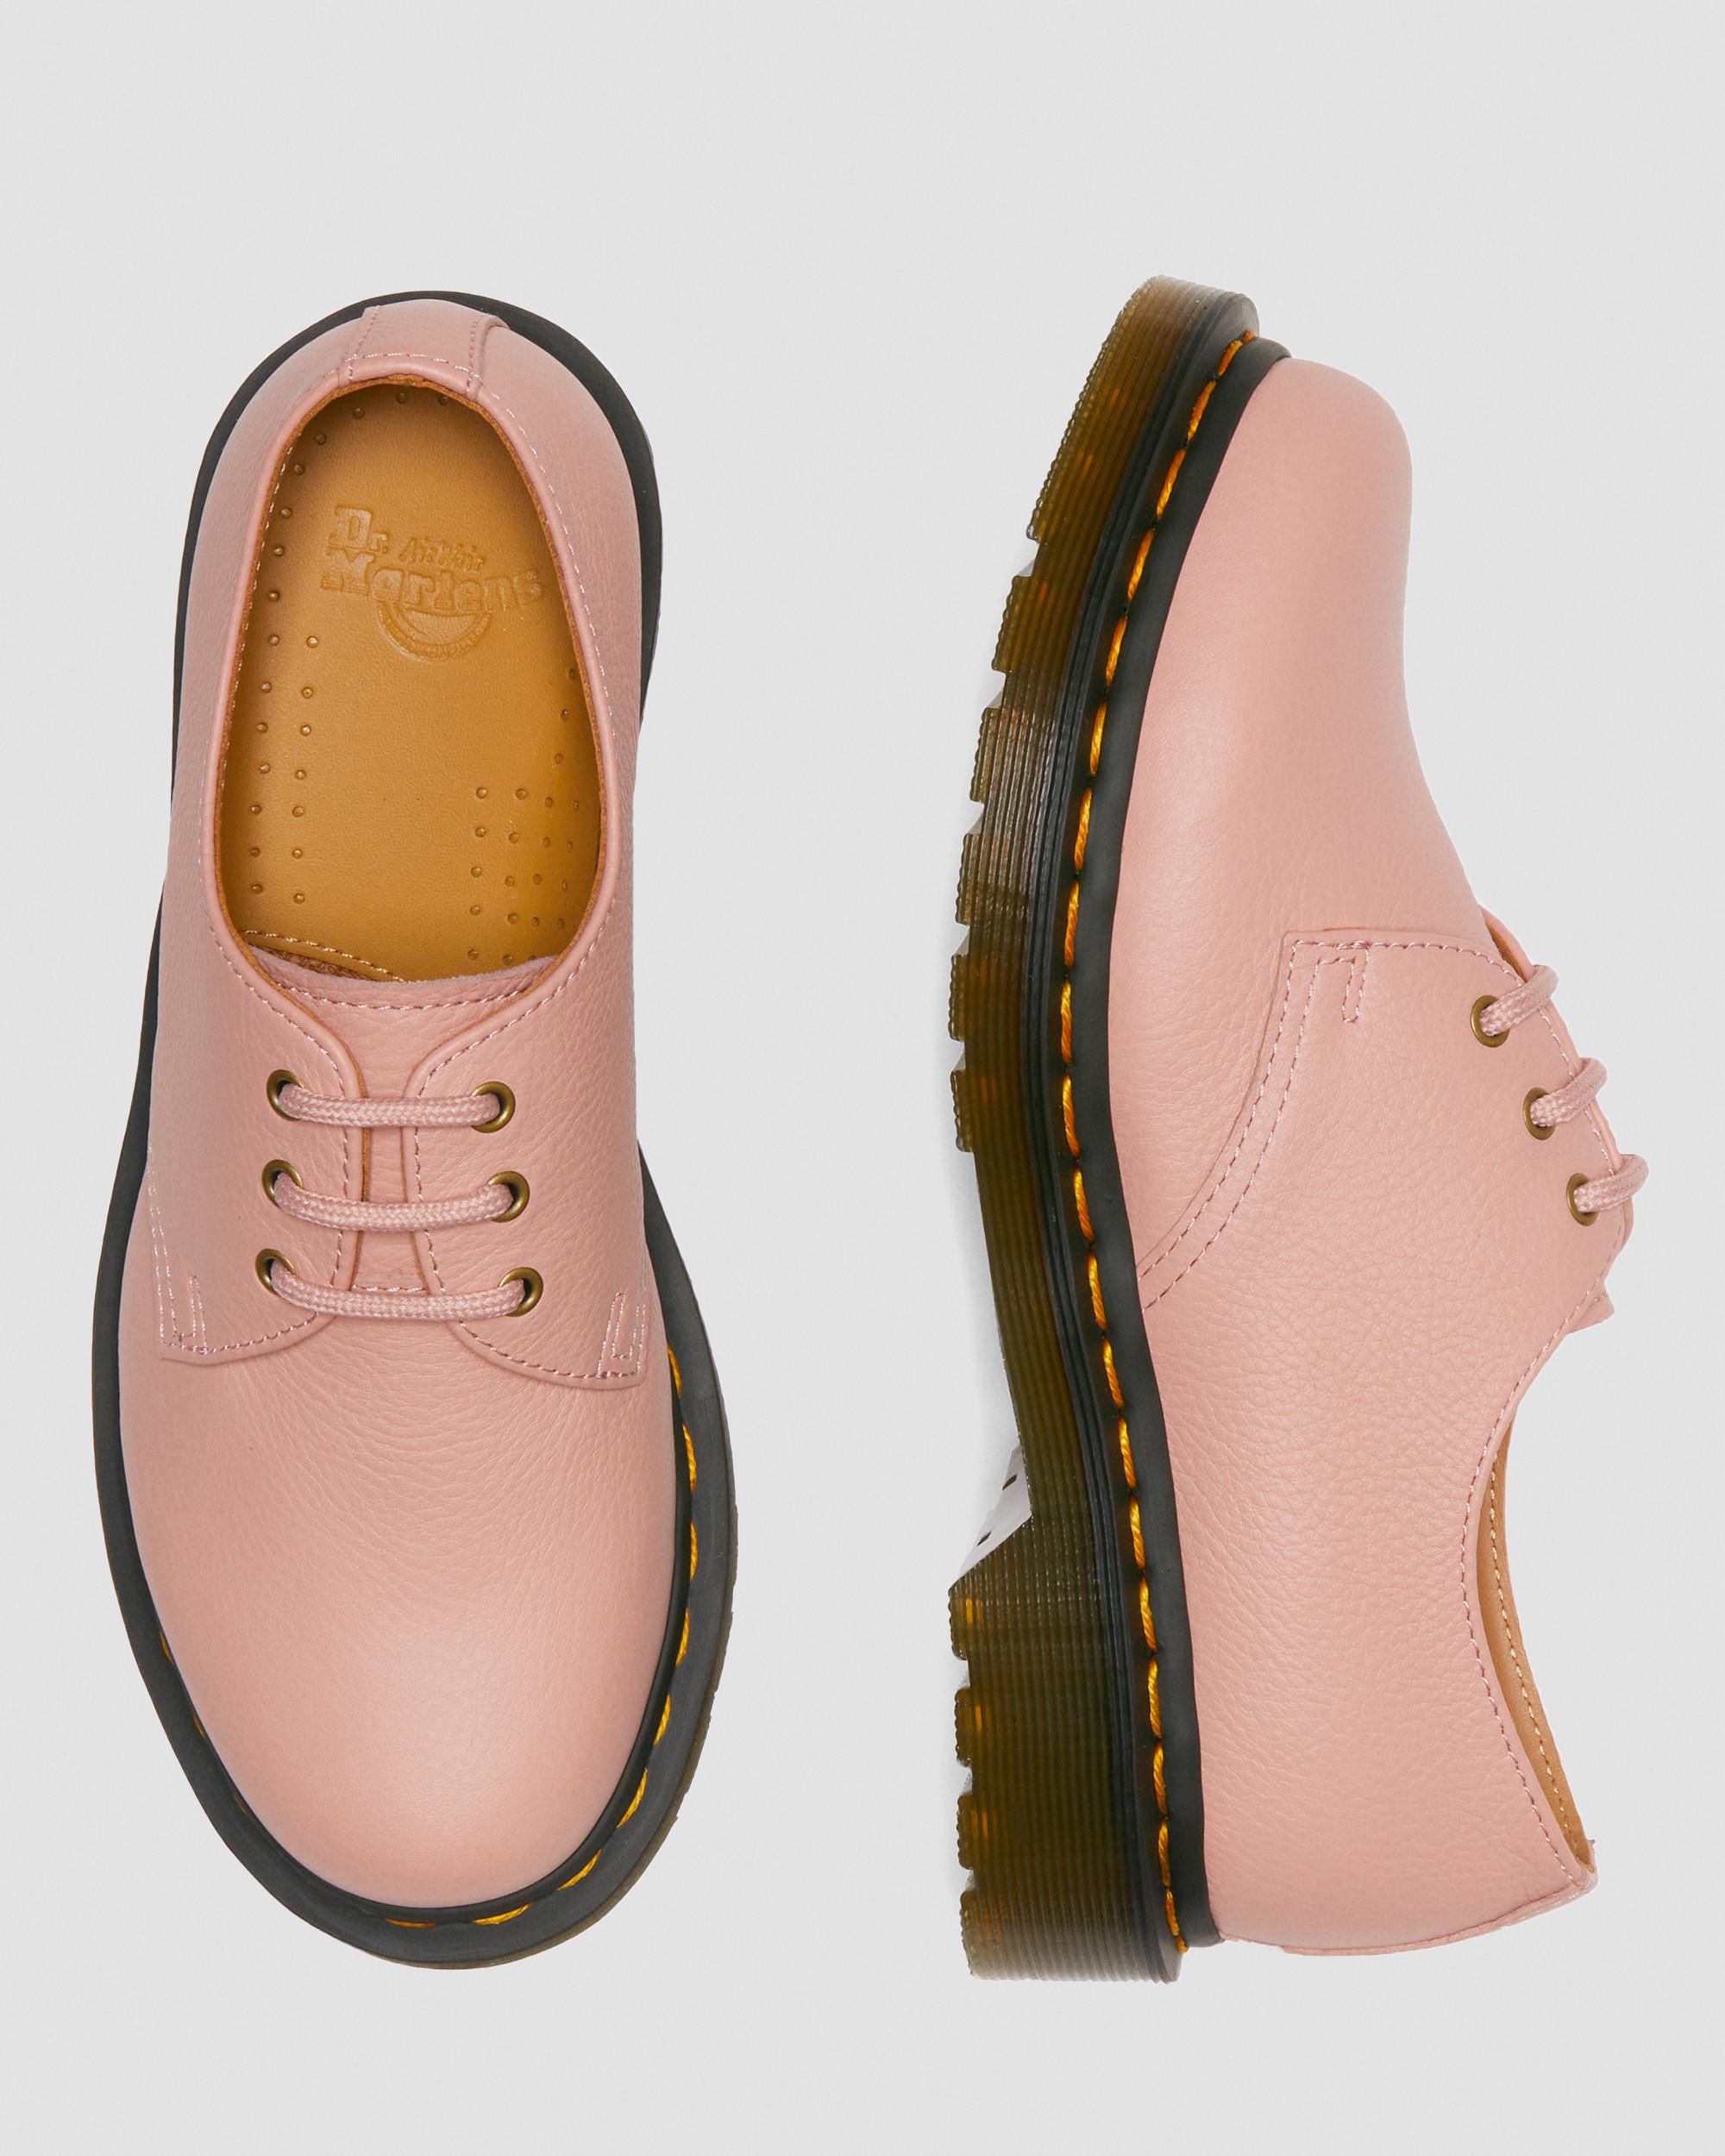 1461 Women's Virginia Leather Oxford Shoes in Peach Beige